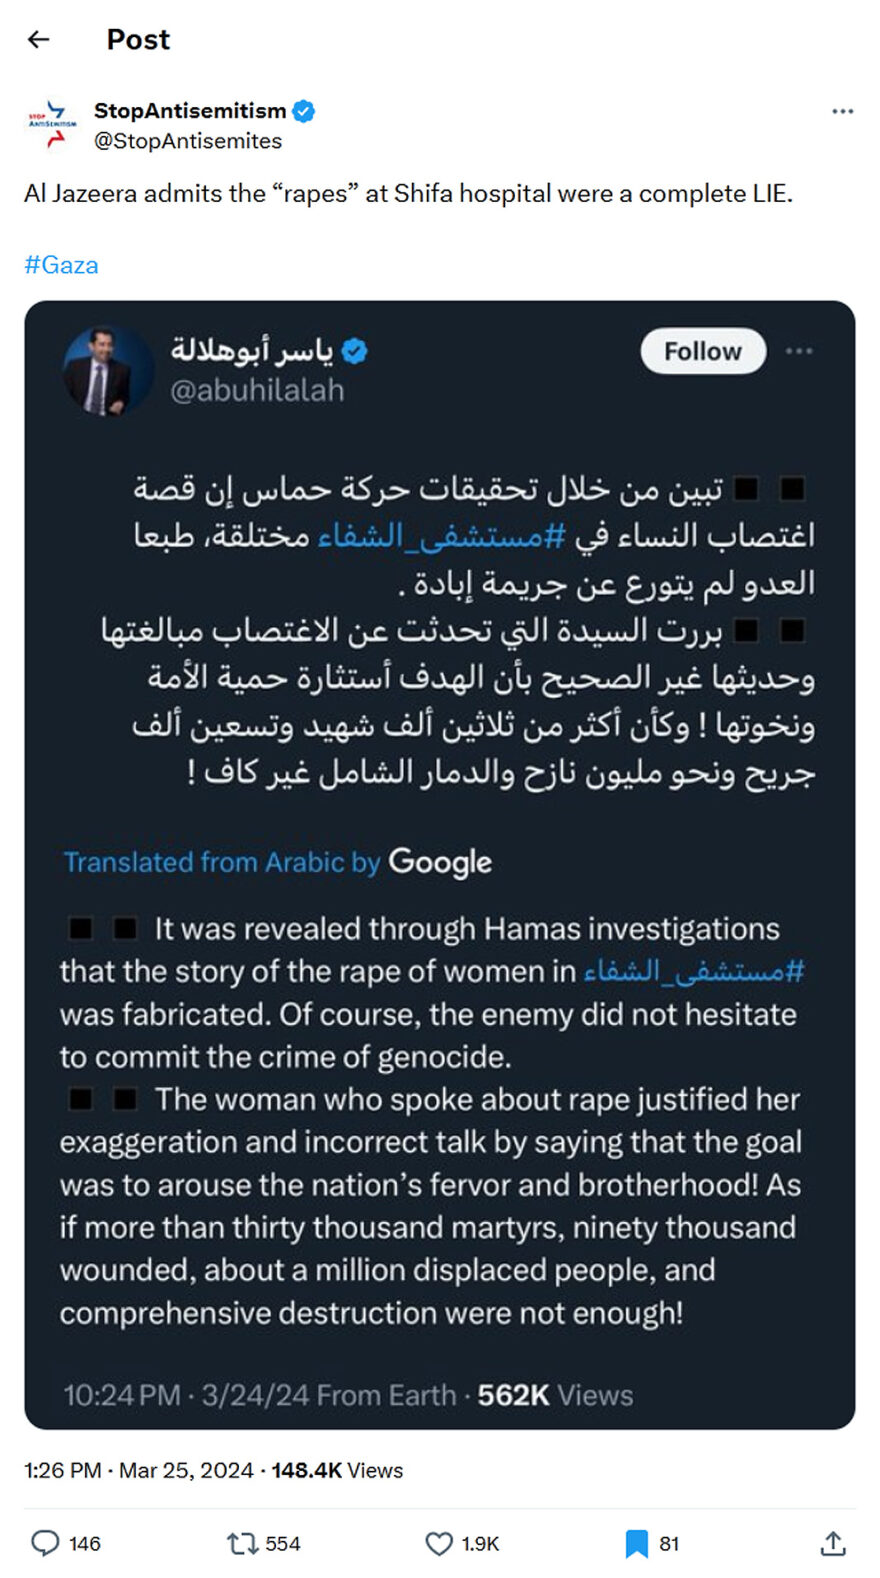 StopAntisemitism-tweet-25March2024-Al Jazeera admits the 'rapes' at Shifa hospital were a complete LIE.png